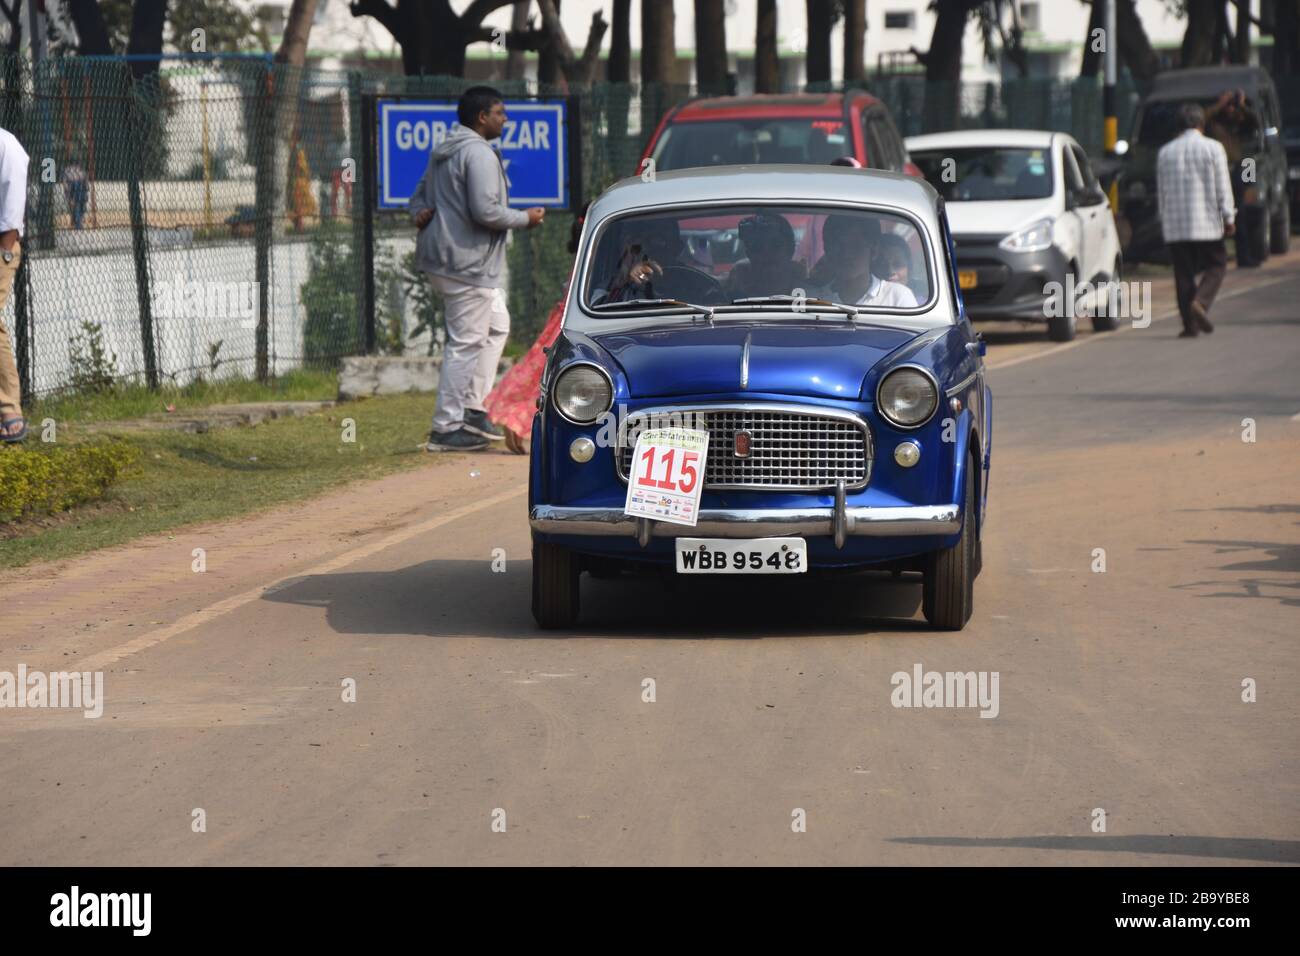 1962 Fiat car with 11 hp and 4 cylinder engine. India WBB 9548. Stock Photo